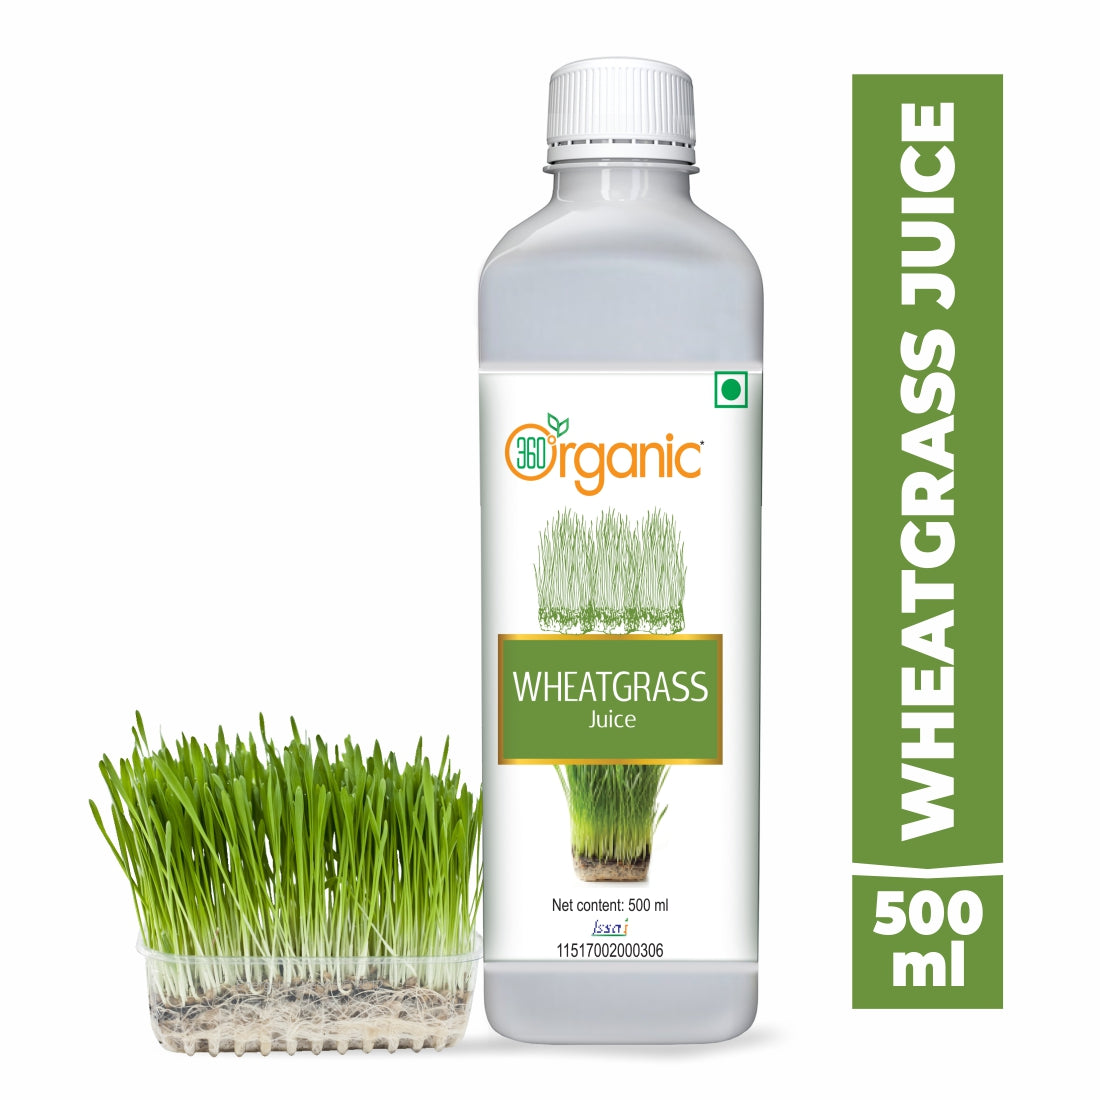 360 Degree Organic Wheatgrass for Help Detoxify the Liver, Cleanse the Digestive System, and Purify Blood- 500 ml